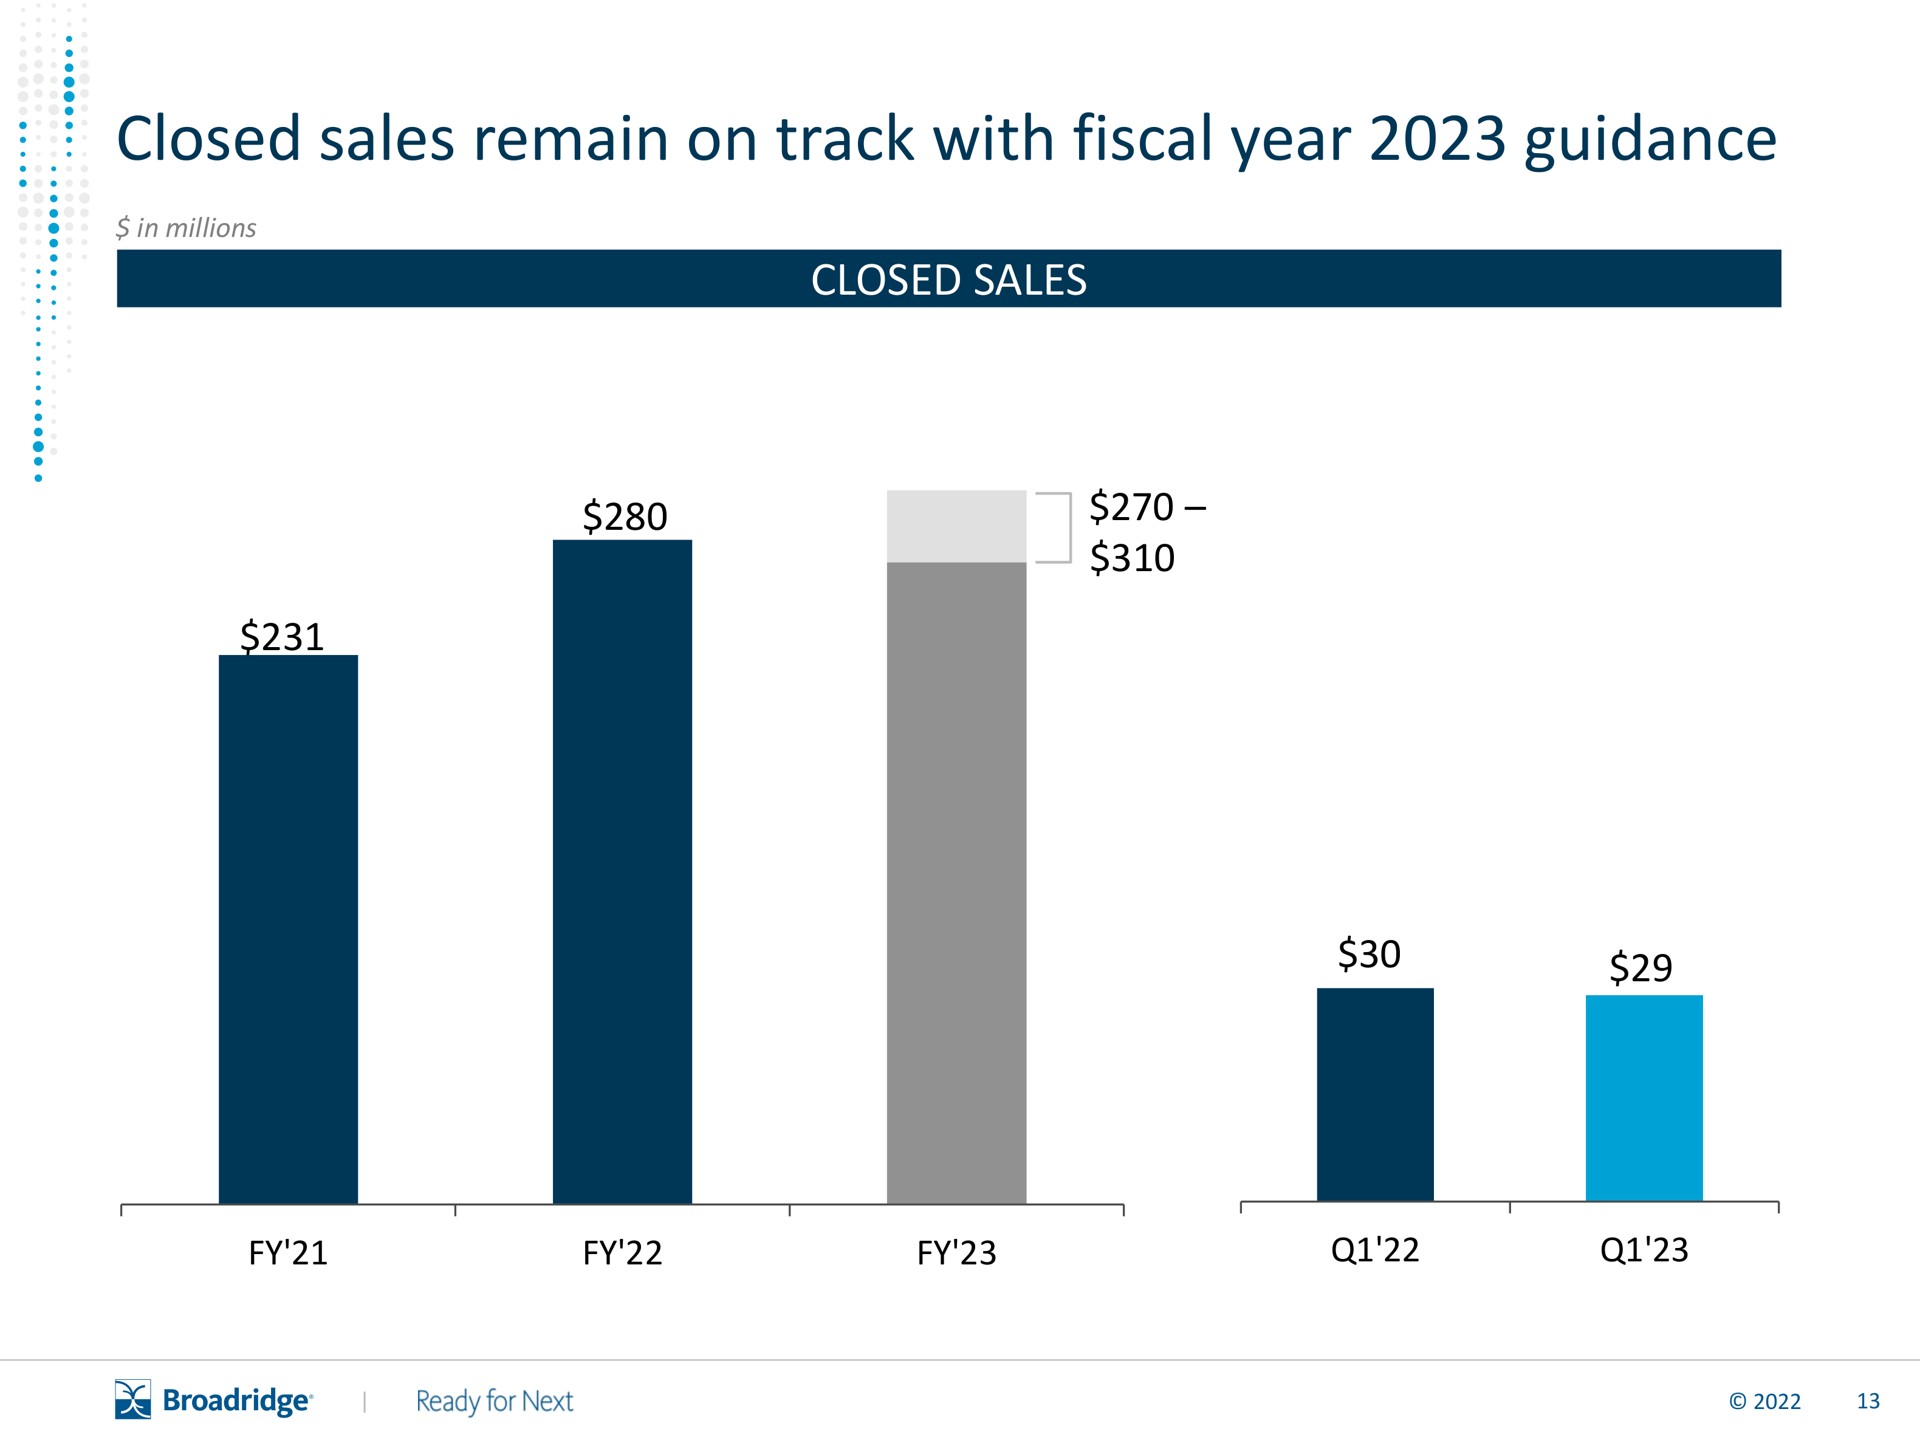 closed sales remain on track with fiscal year guidance | Broadridge Financial Solutions